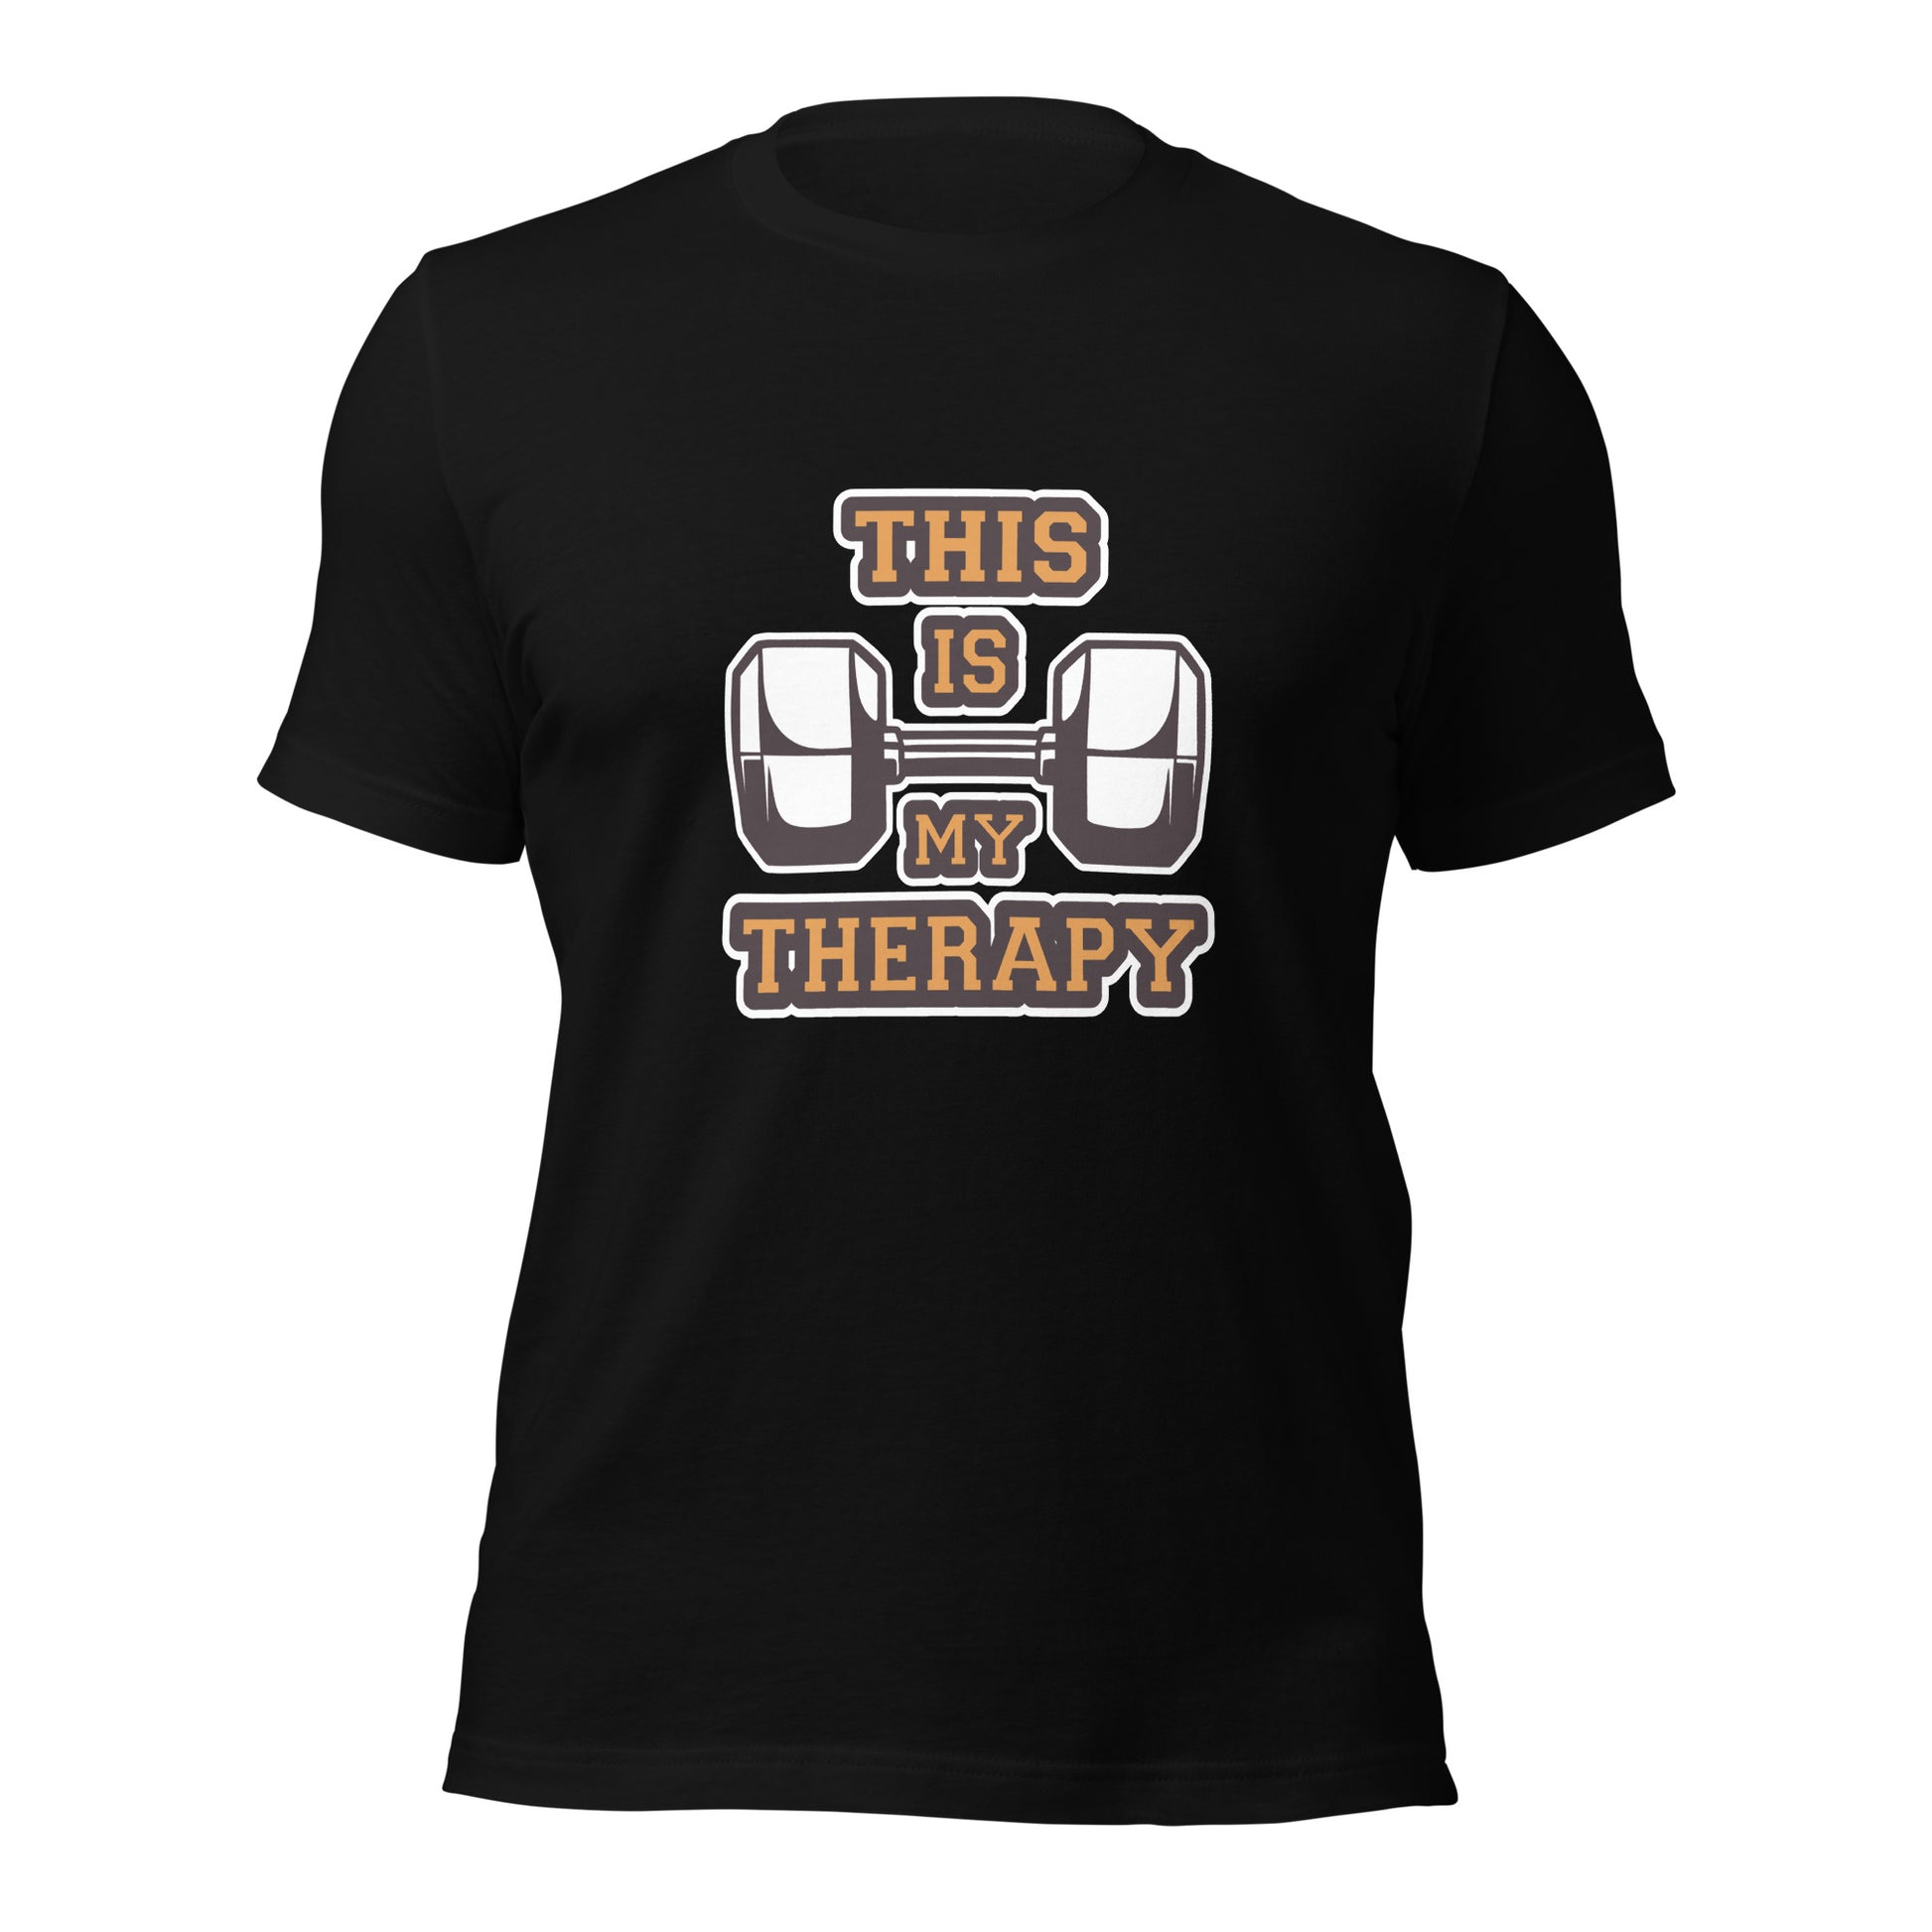 THIS IS MY THERAPY Unisex T-shirt Introducing our "THIS IS MY THERAPY" Gym Unisex T-shirt – where fitness meets catharsis! 🏋️‍♂️Turn your workout space into a sanctuary with this motivational tee. Here's why it's a must-have: